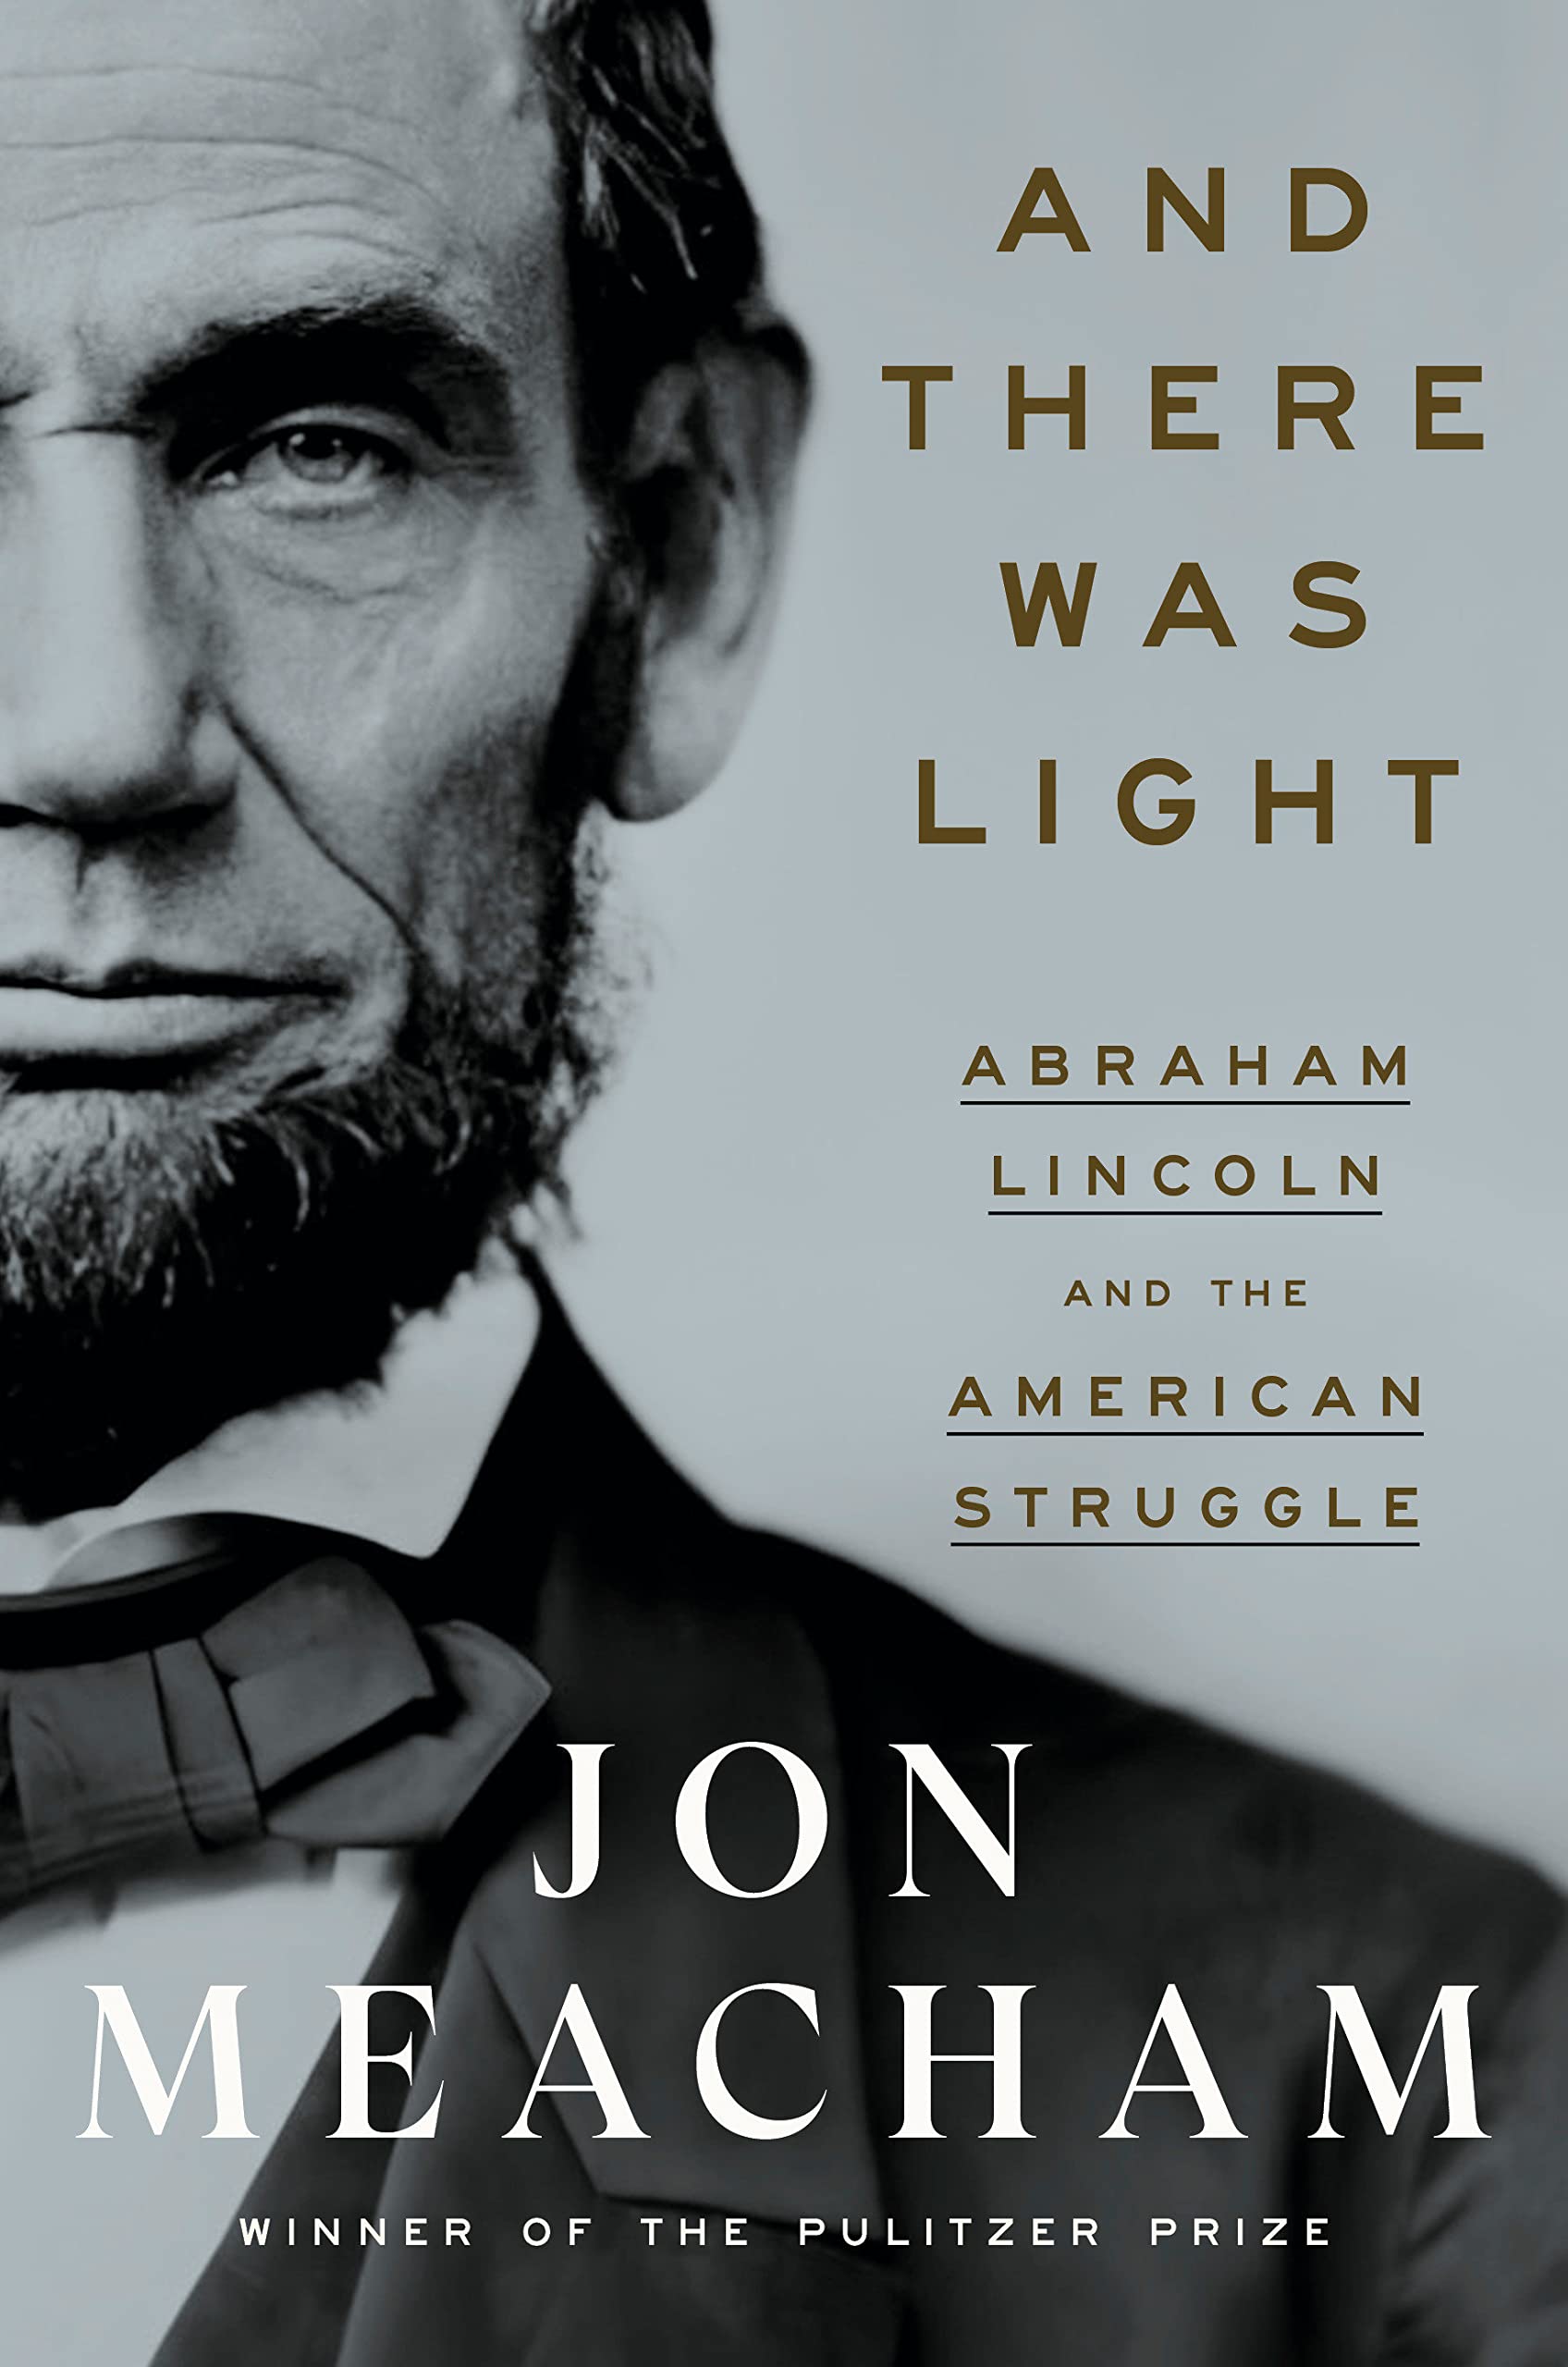 Image of the Book Cover featuring a black and white image of Abraham Lincoln.